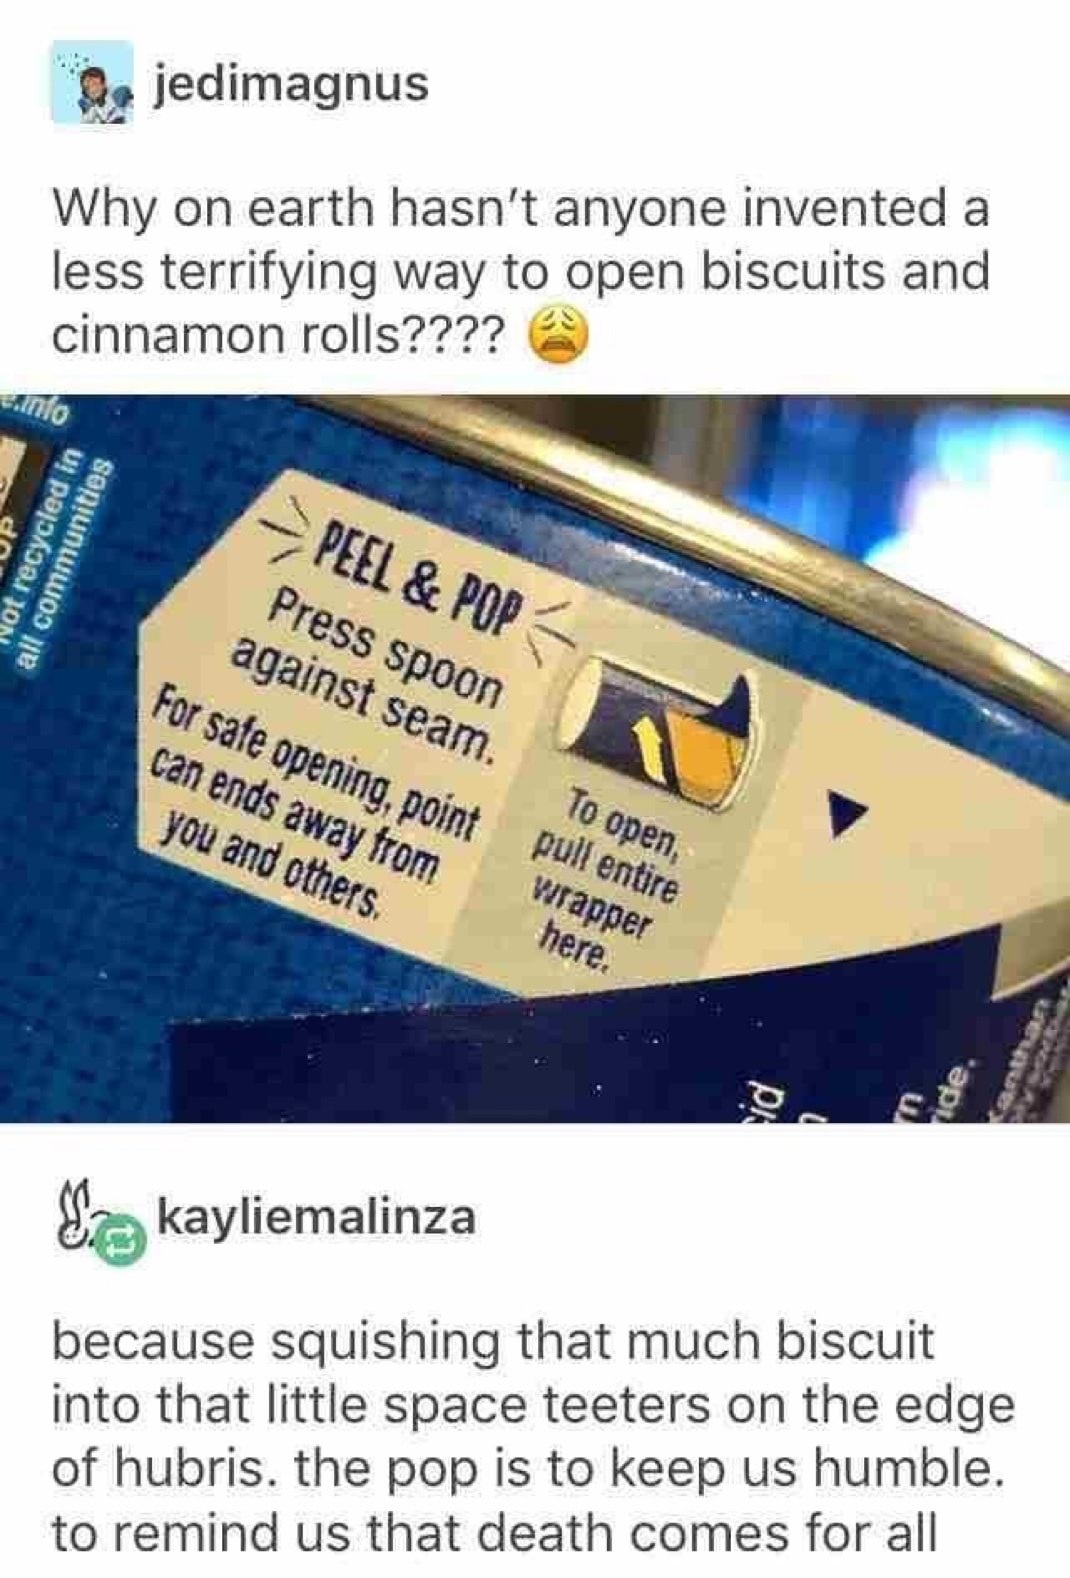 littlespace ways - anthas jedimagnus Why on earth hasn't anyone invented a less terrifying way to open biscuits and cinnamon rolls???? Not recycled in all communities Peel & Pop Press spoon against seam For safe opening, point pull entire can ends away fr